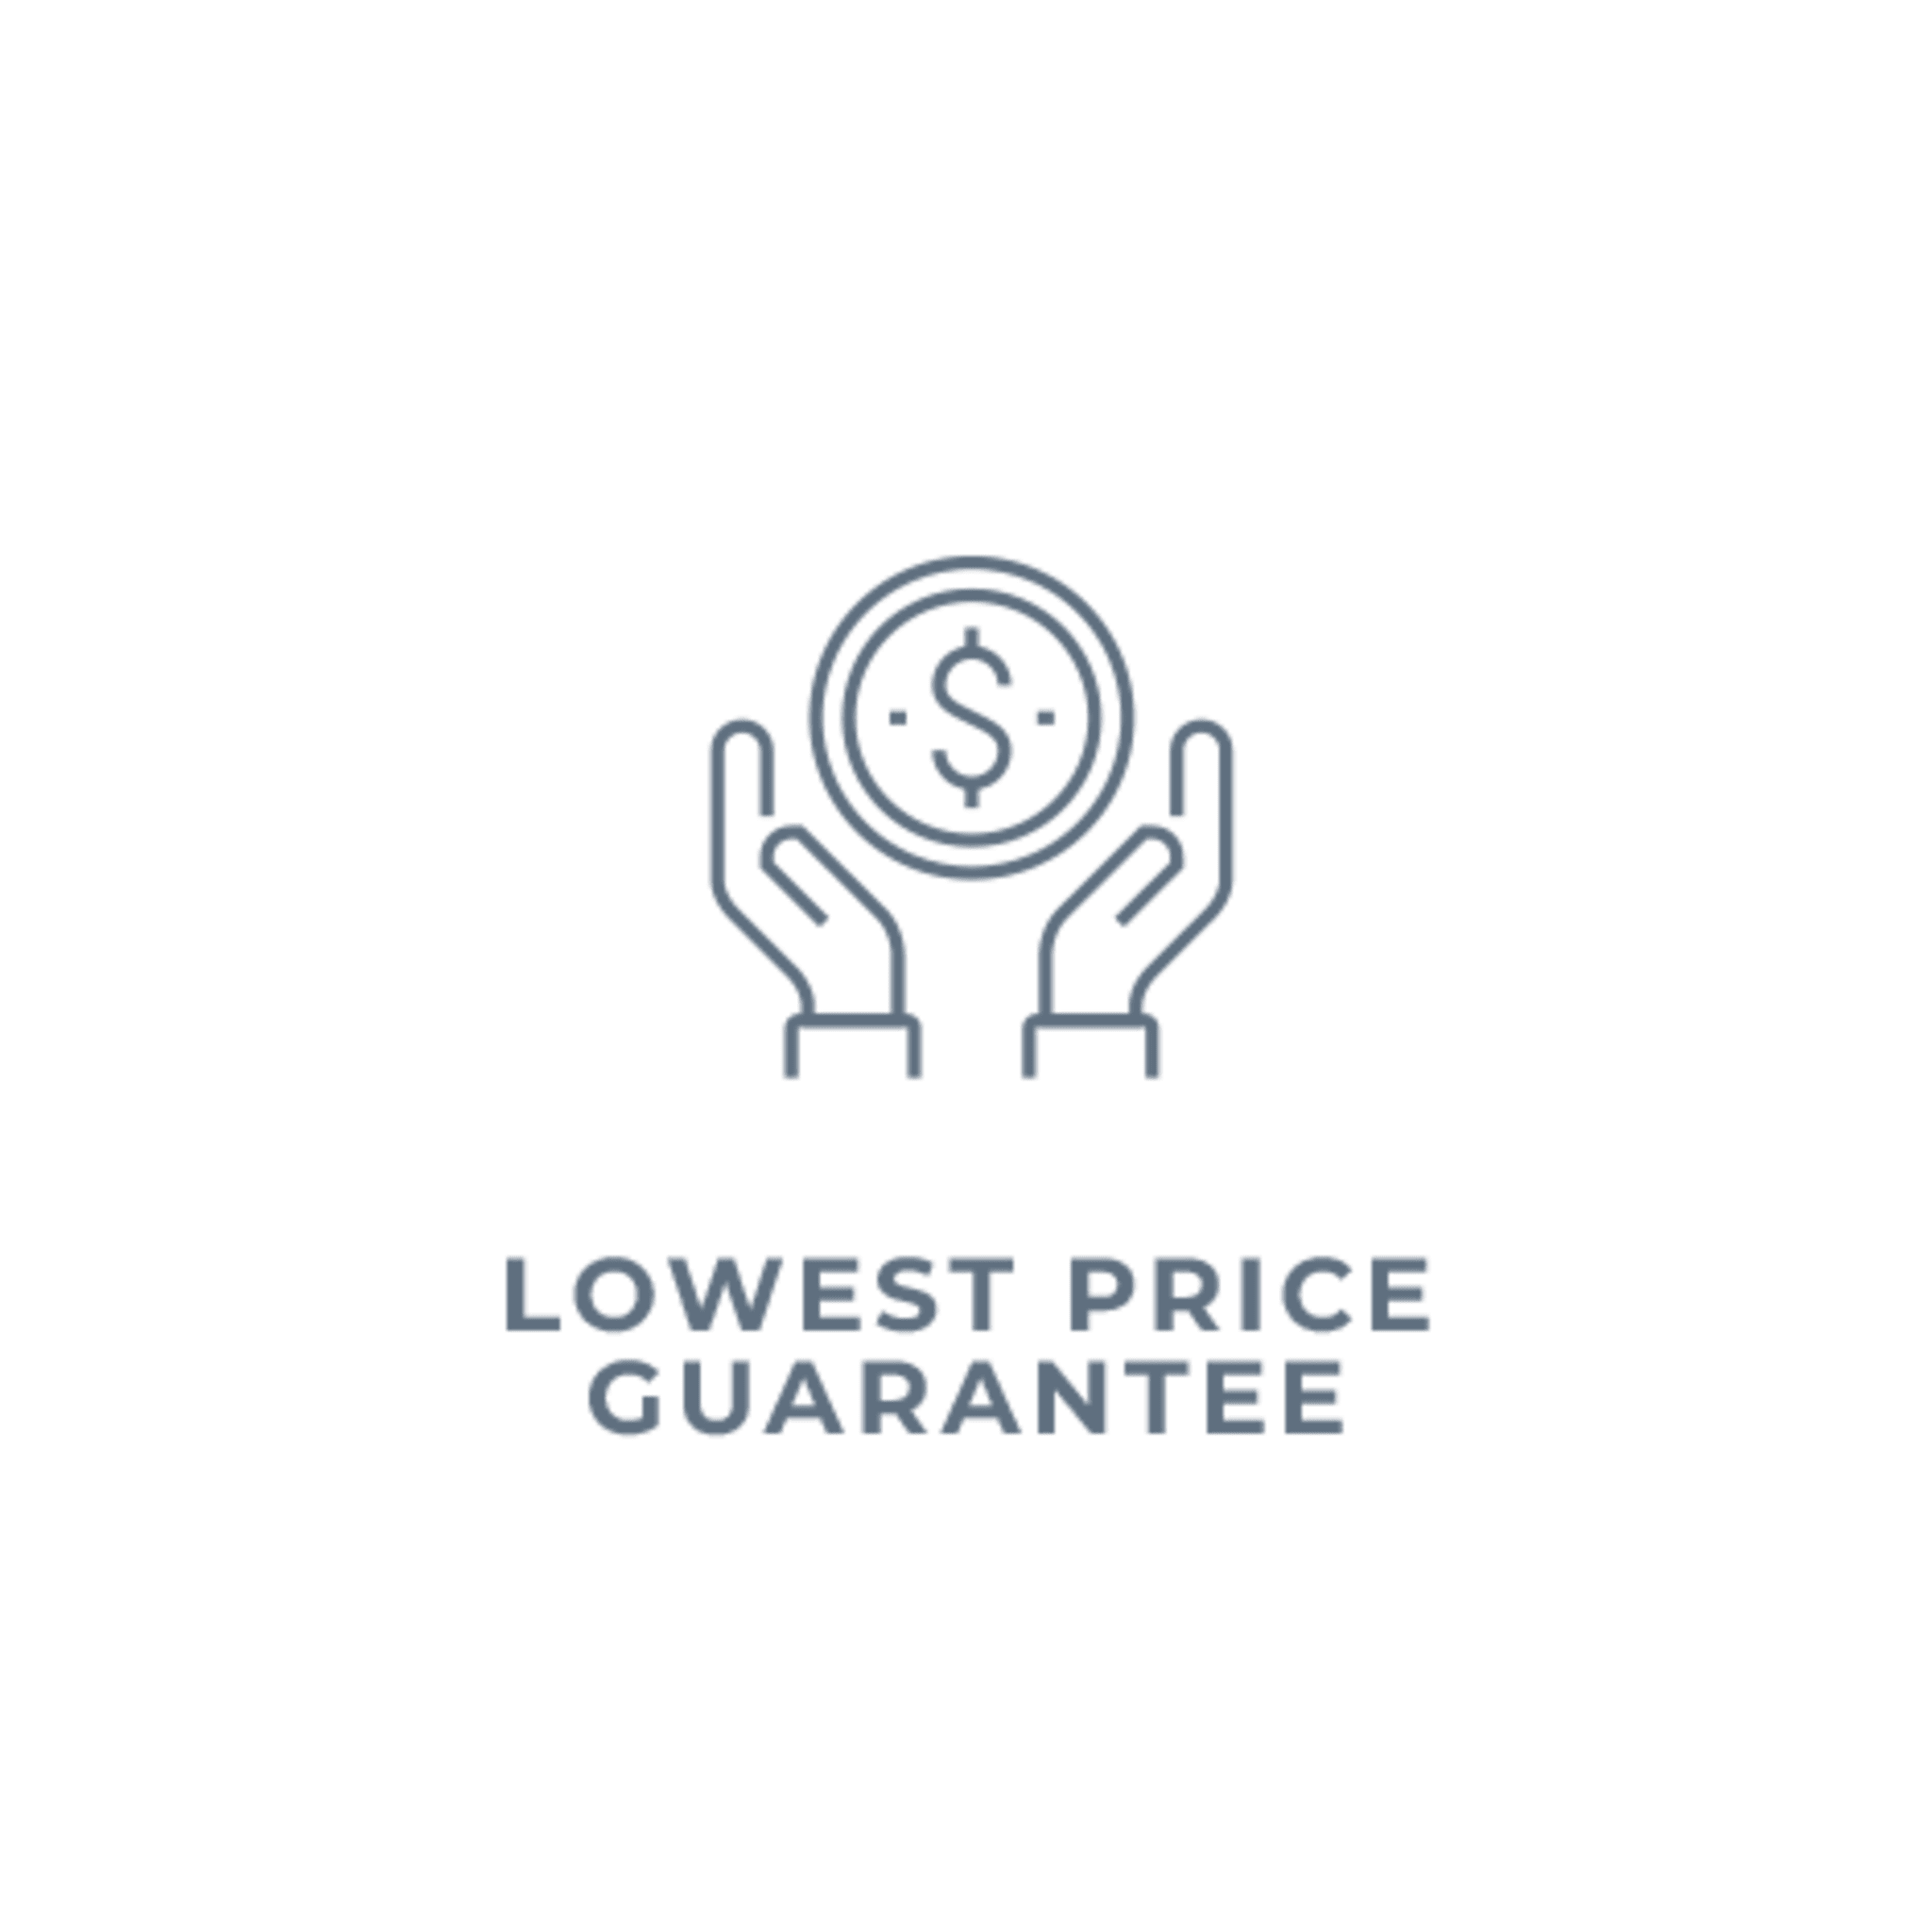 Sove Trust Markers Lowest Price Guarantee Icon